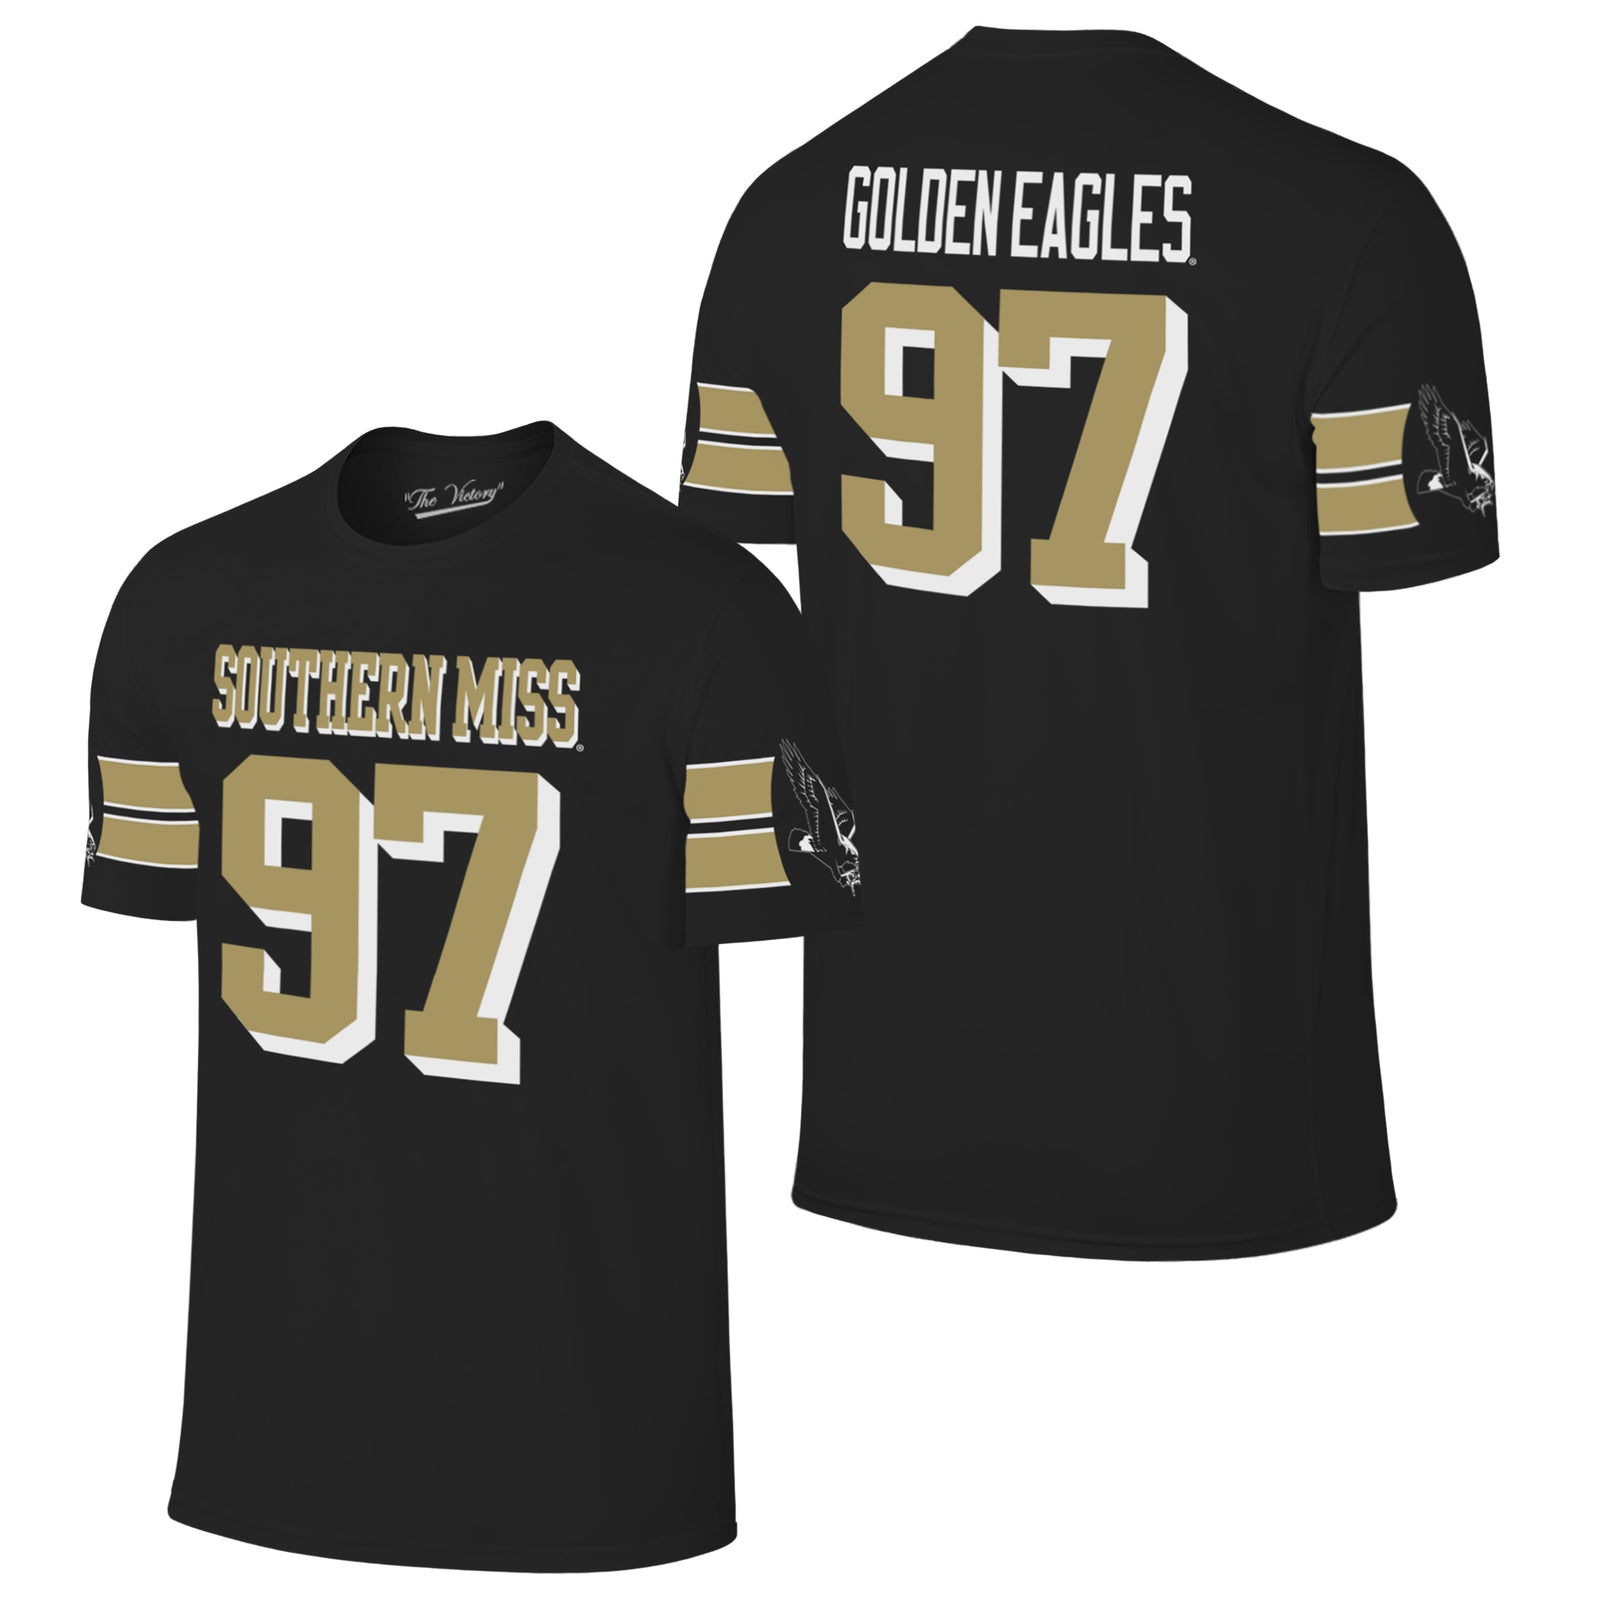 Southern Miss Jersey Tee